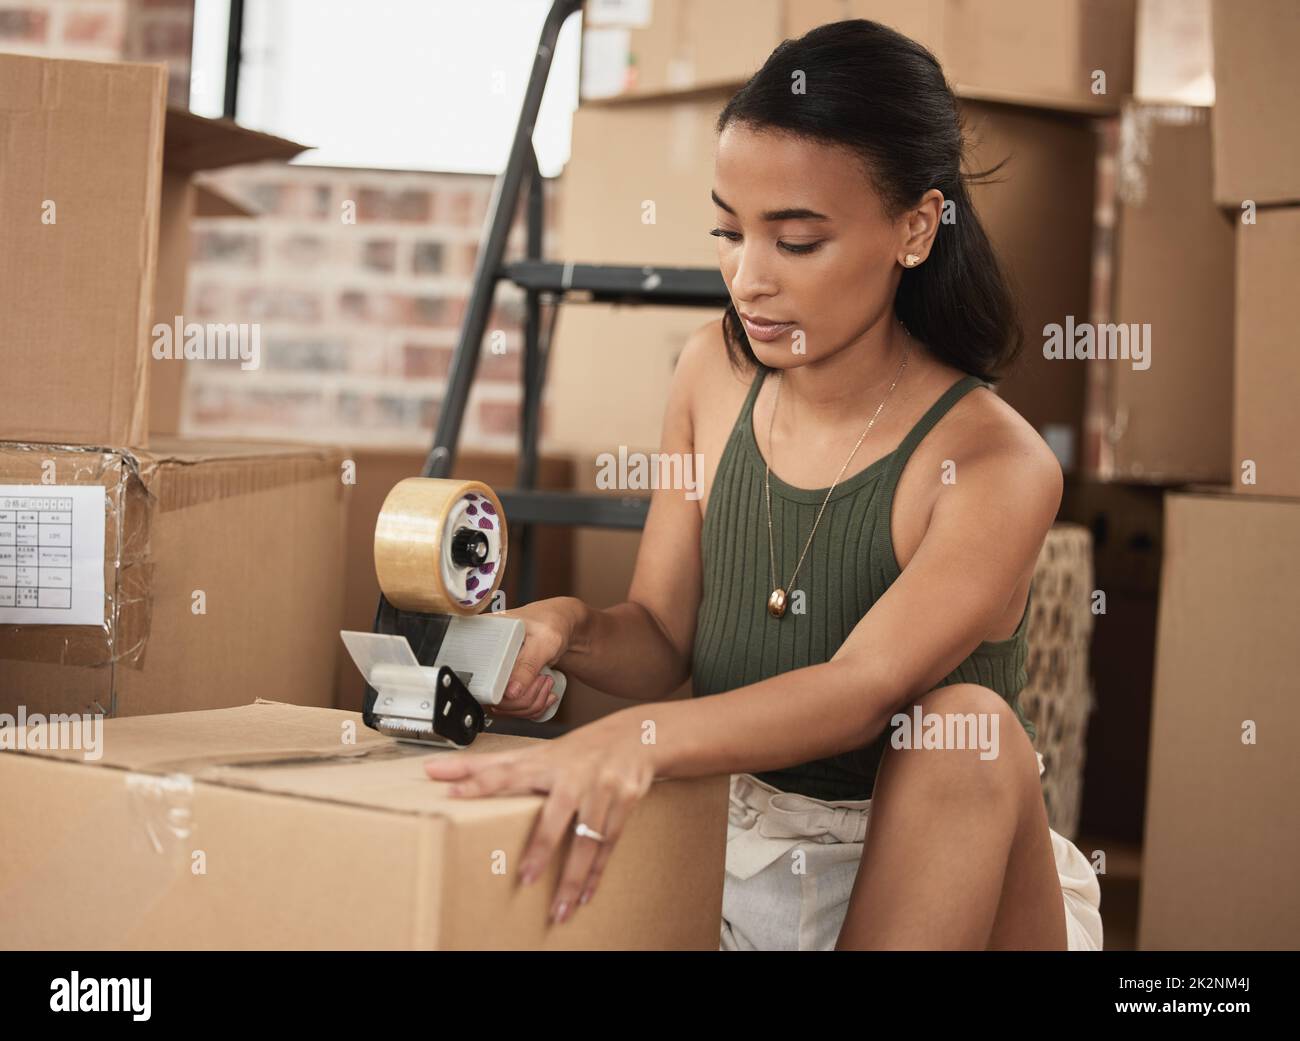 Everyone has their own reason for moving. Shot of a young woman packing up to move in a room at home. Stock Photo